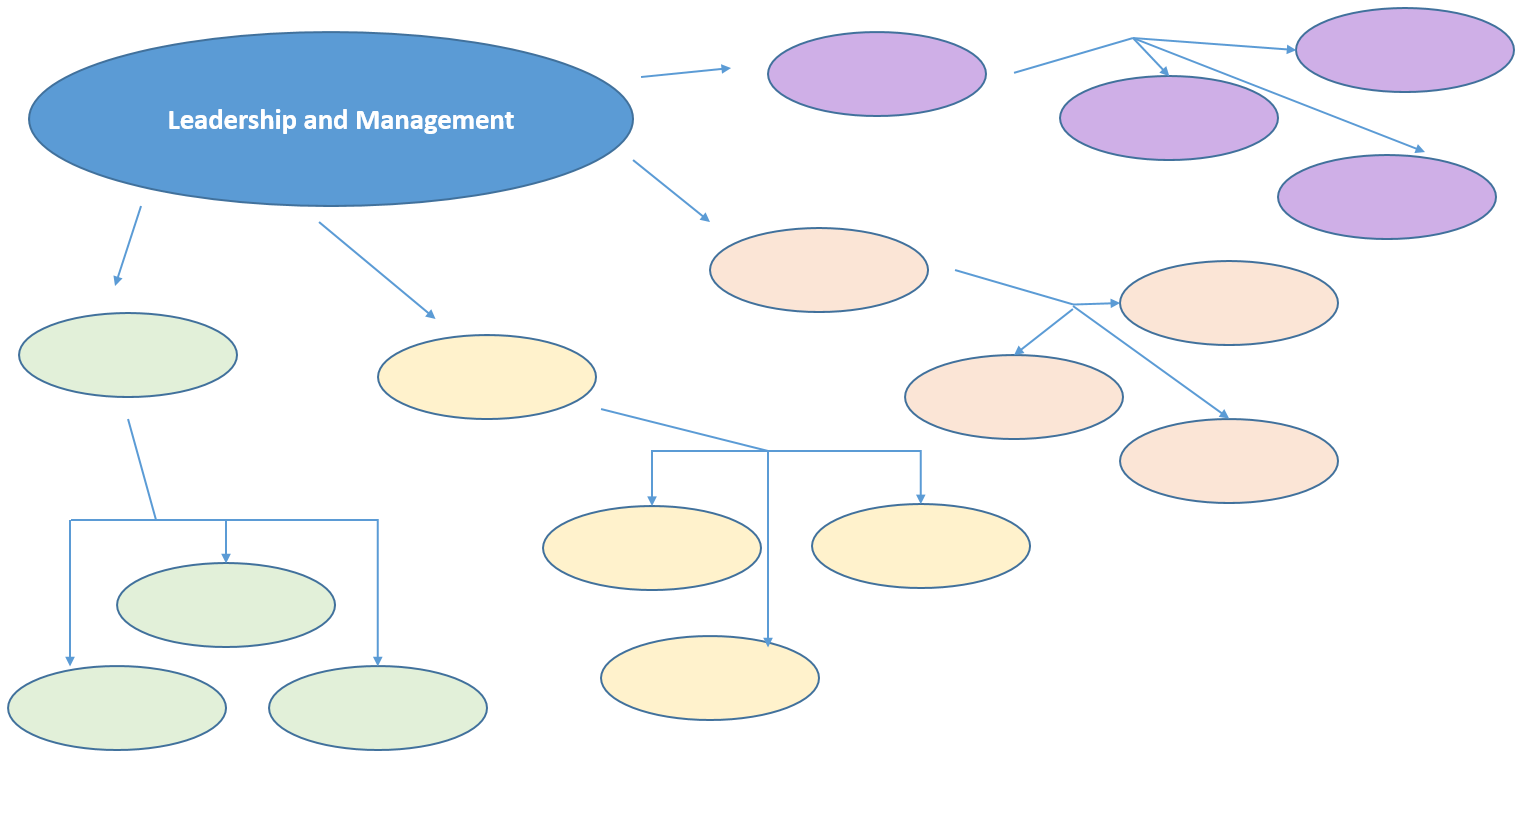 Template for Leadership and Management Concept Map with a bubble that says Leadership and Management which points to other blank bubbles and they point to more blank bubbles.